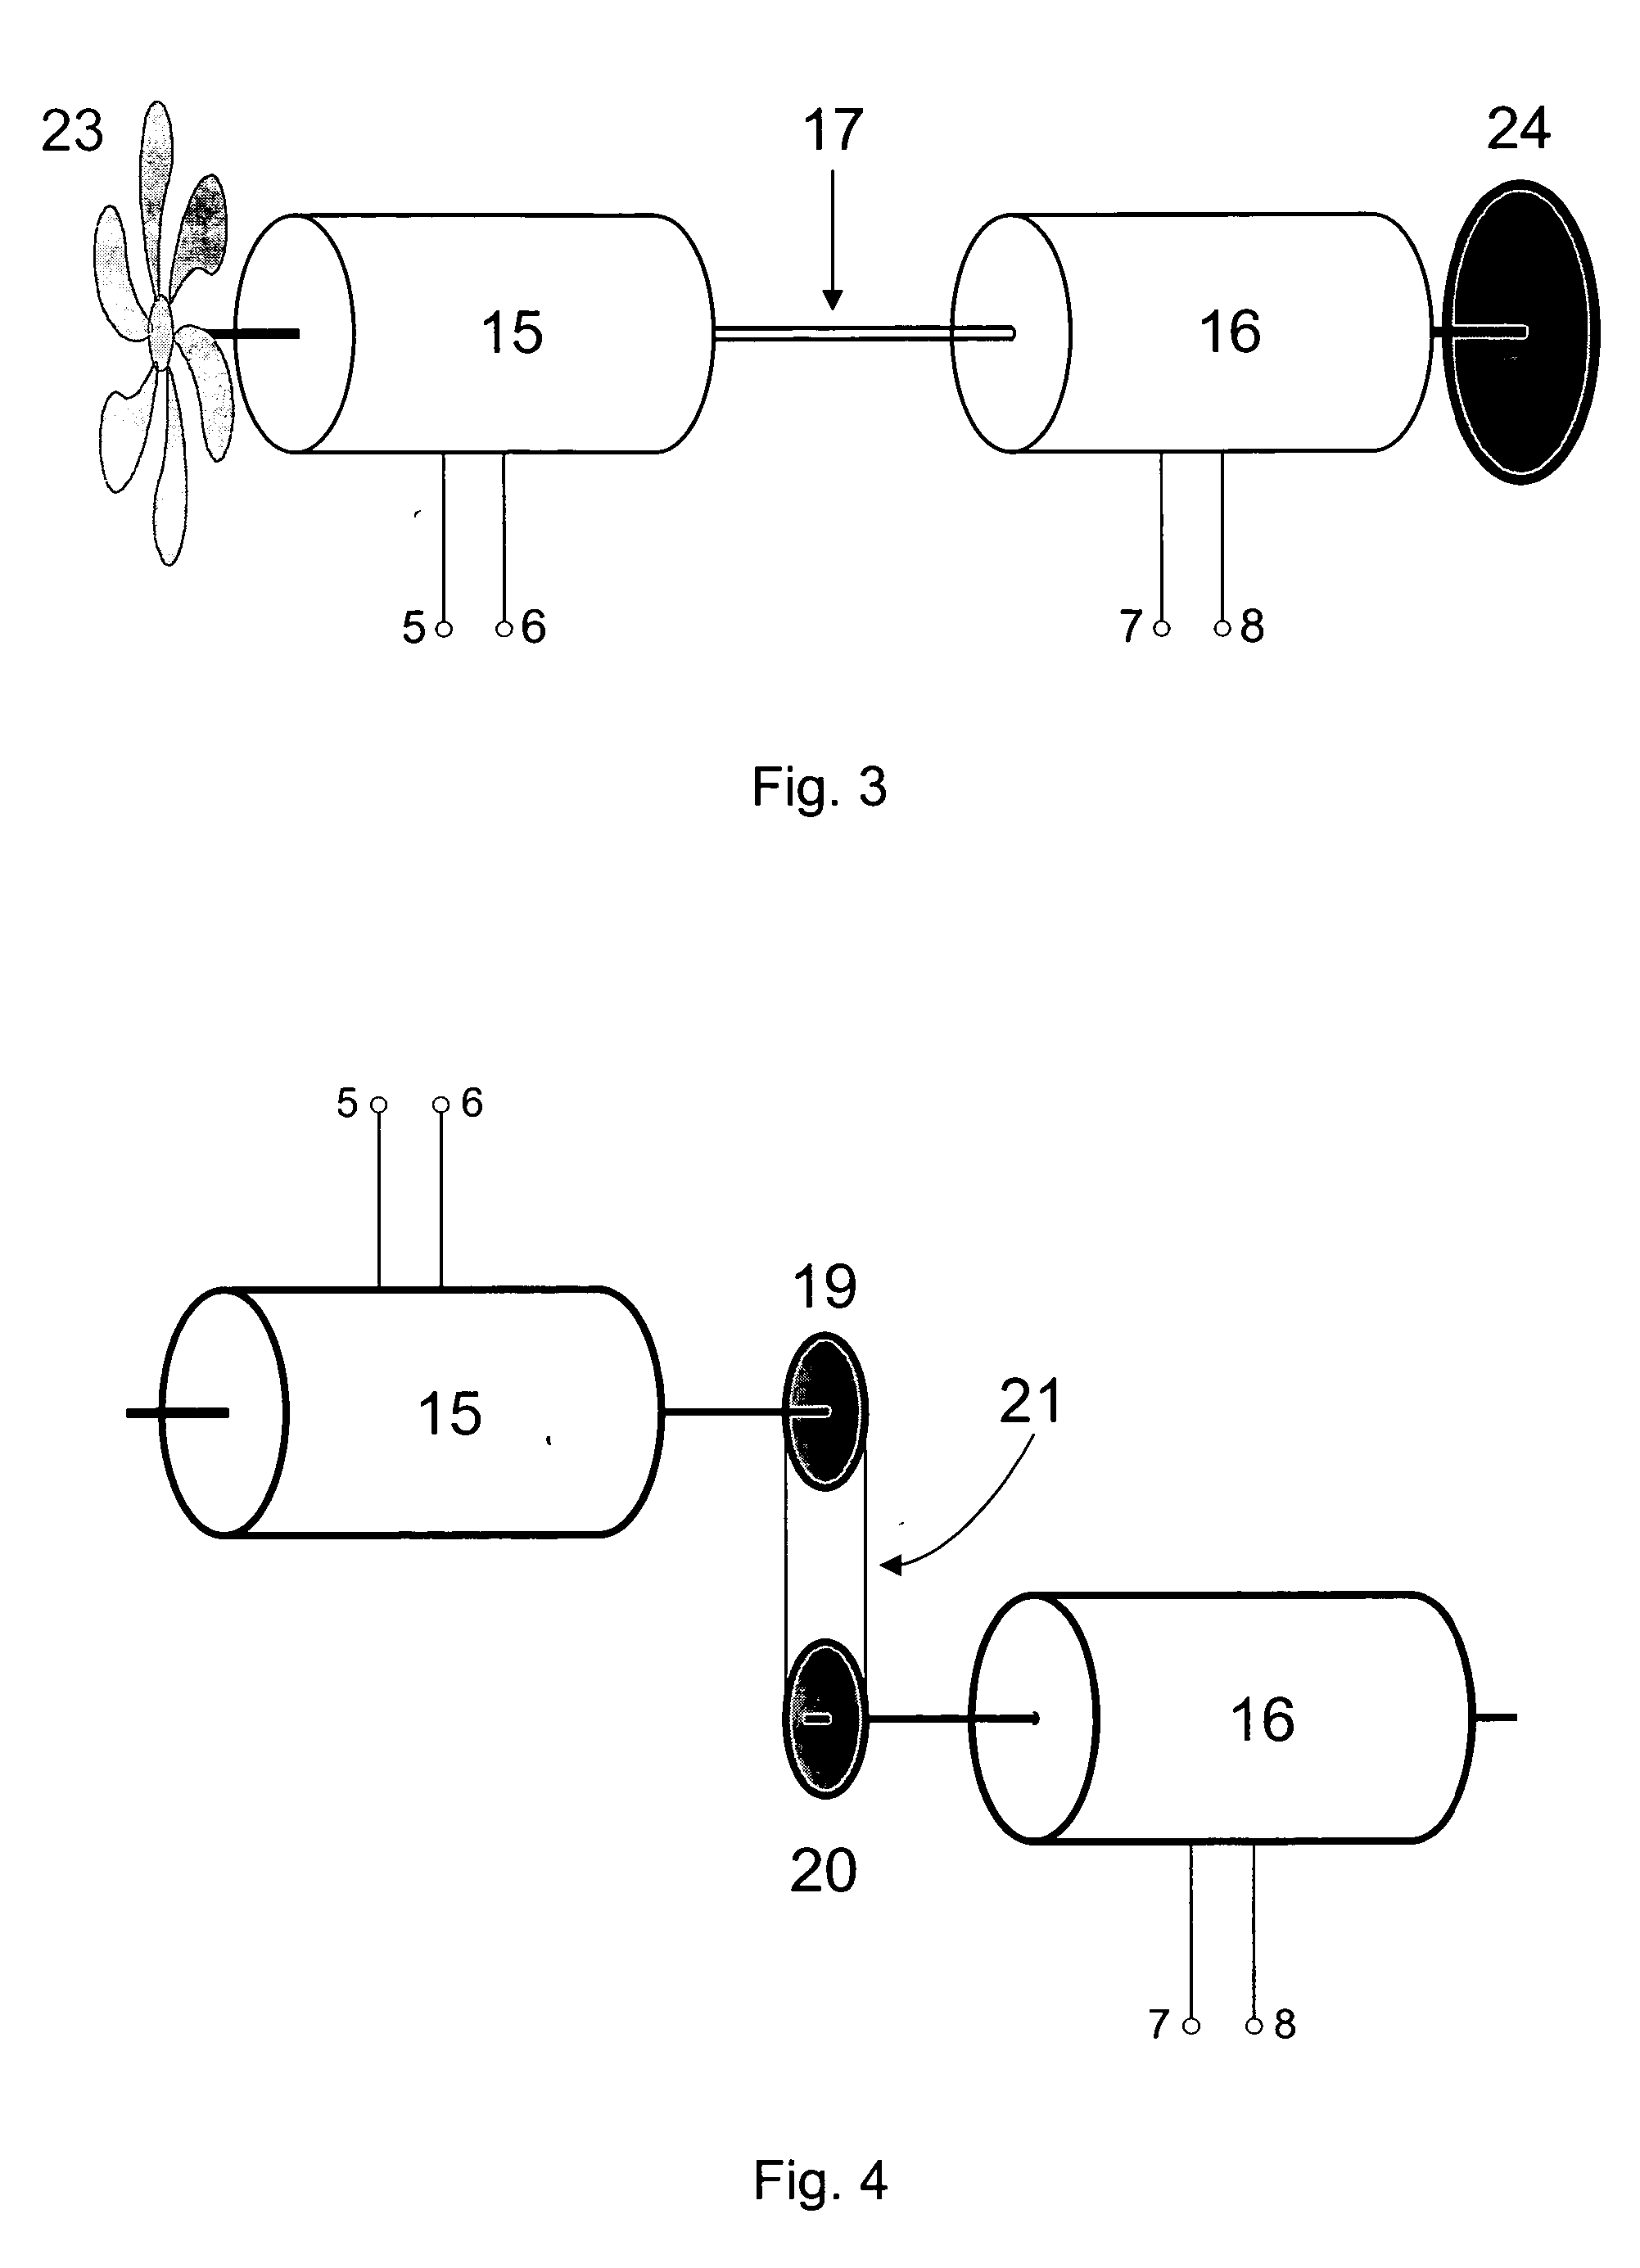 Method and apparatus for isolated transformation of a first voltage into a second voltage for measurement of electrical bioimpedances or bioconductances